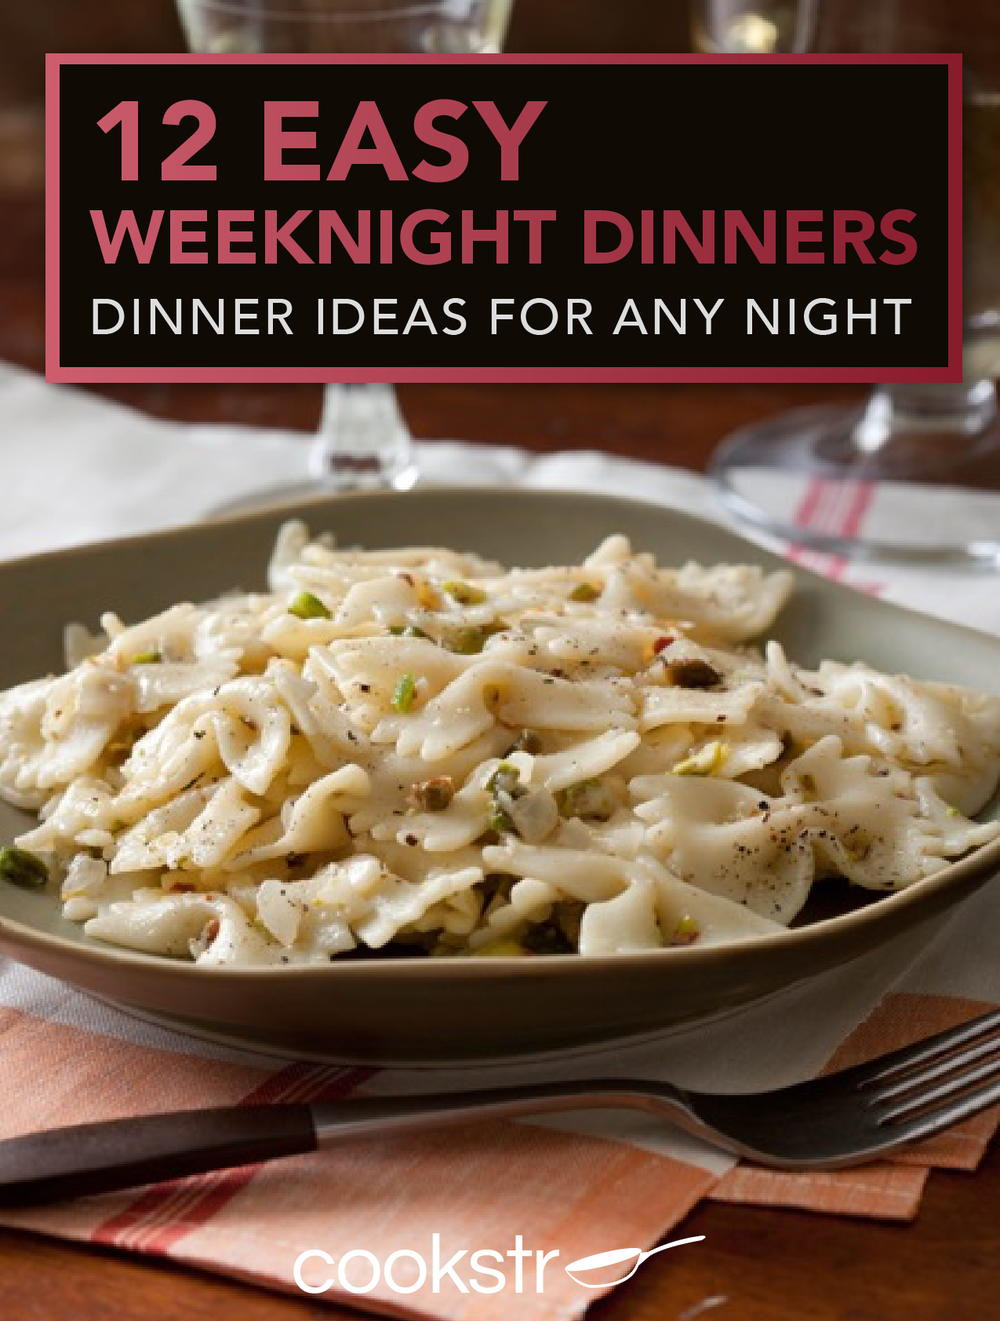 Weeknight Dinner Recipes
 12 Easy Weeknight Dinners Dinner Ideas for Any Night